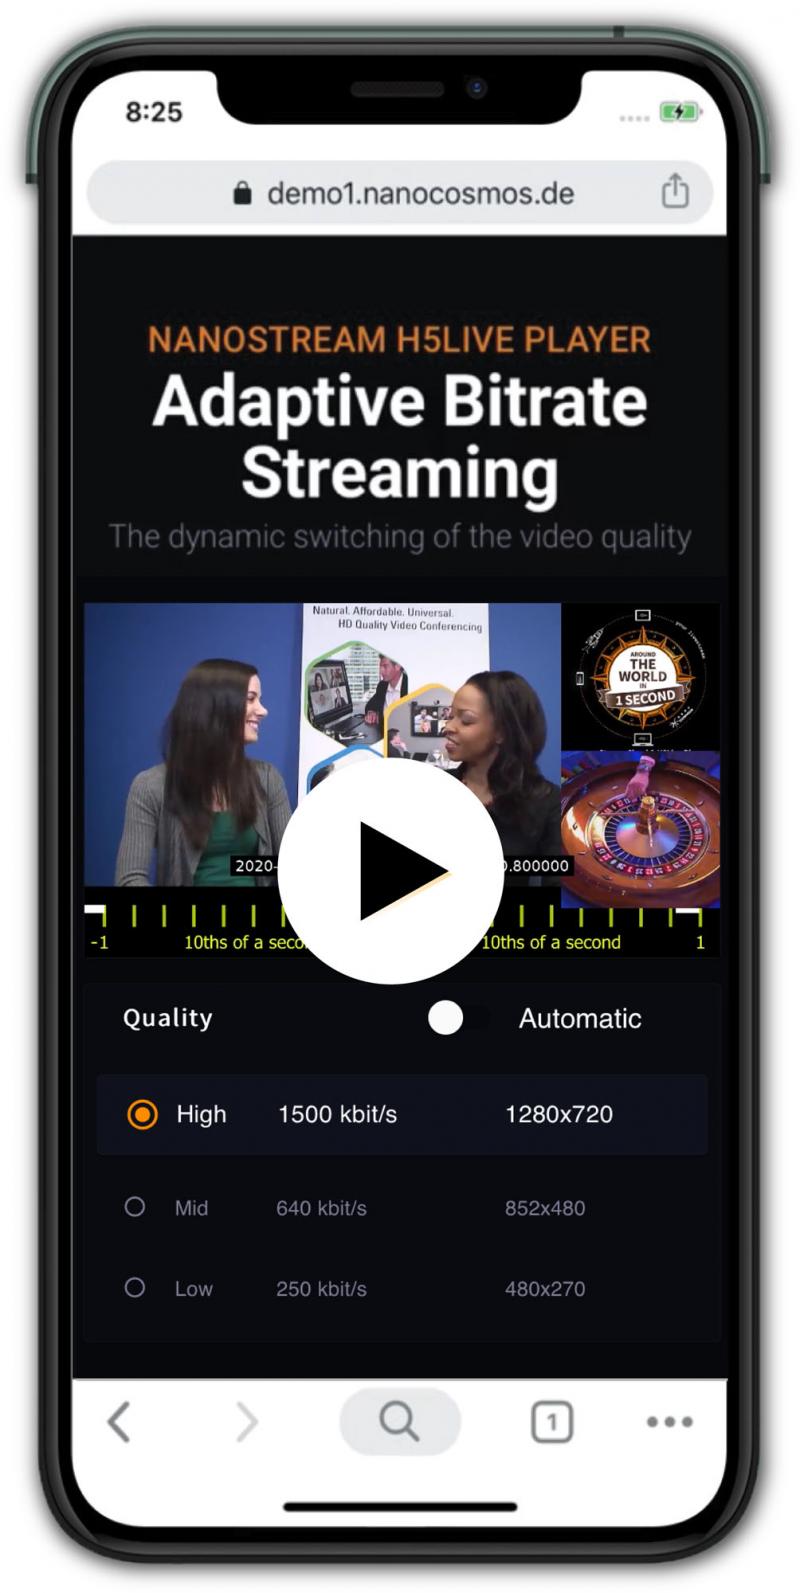 Ultra-low Latency Live Streaming Goes Mainstream